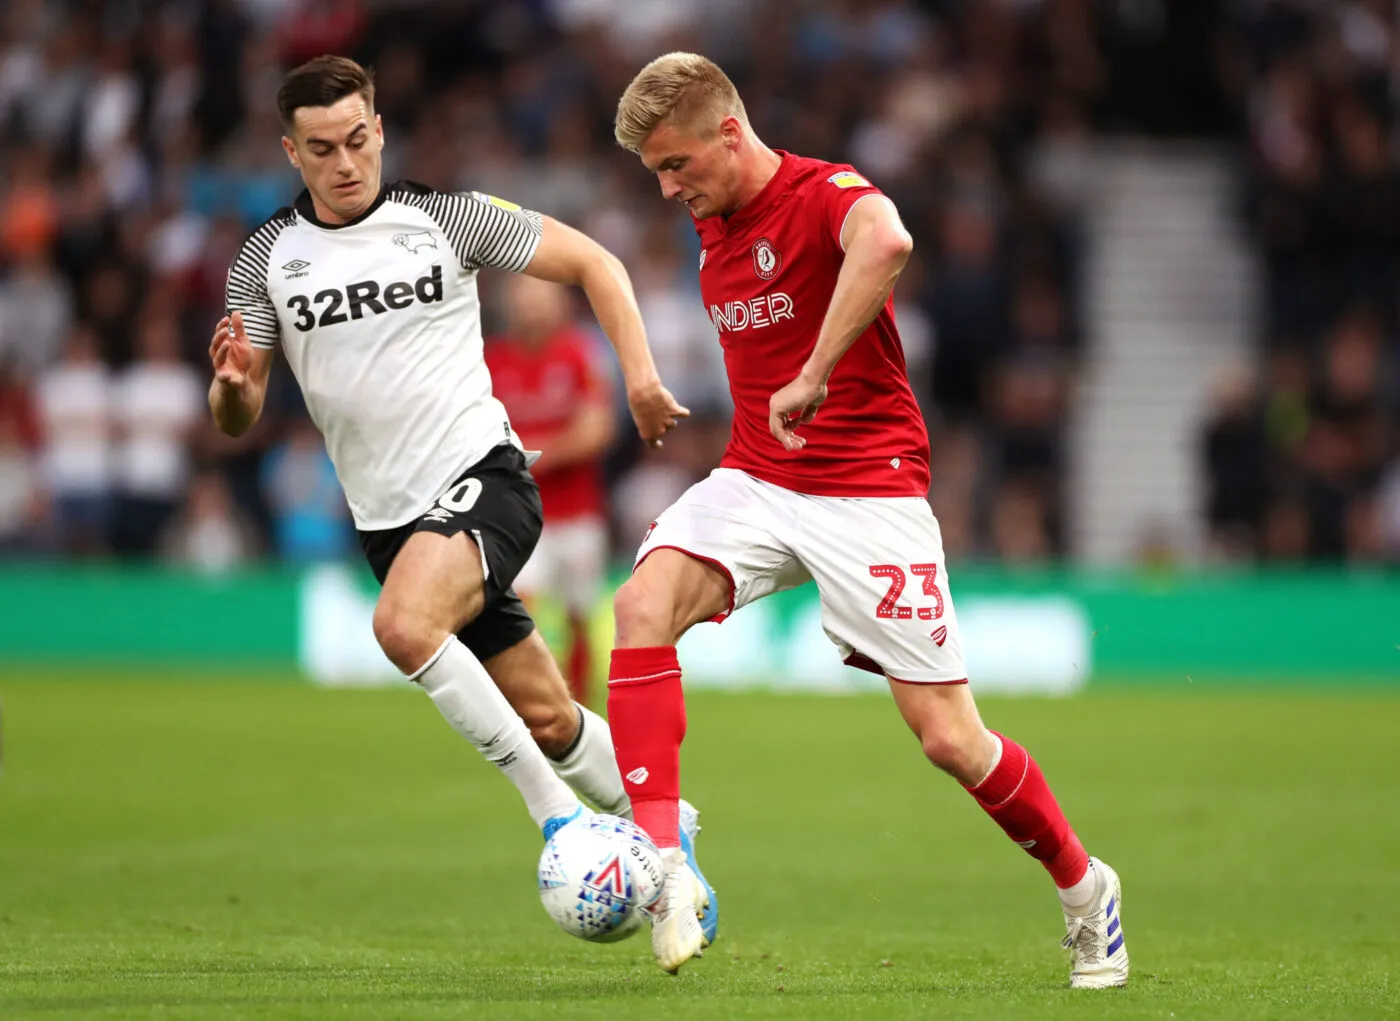 Derby County's Tom Lawrence (left) and Bristol City's Taylor Moore battle for the ball during the Sky Bet Championship match at Pride Park, Derby. Photo : PA Images / Icon Sport